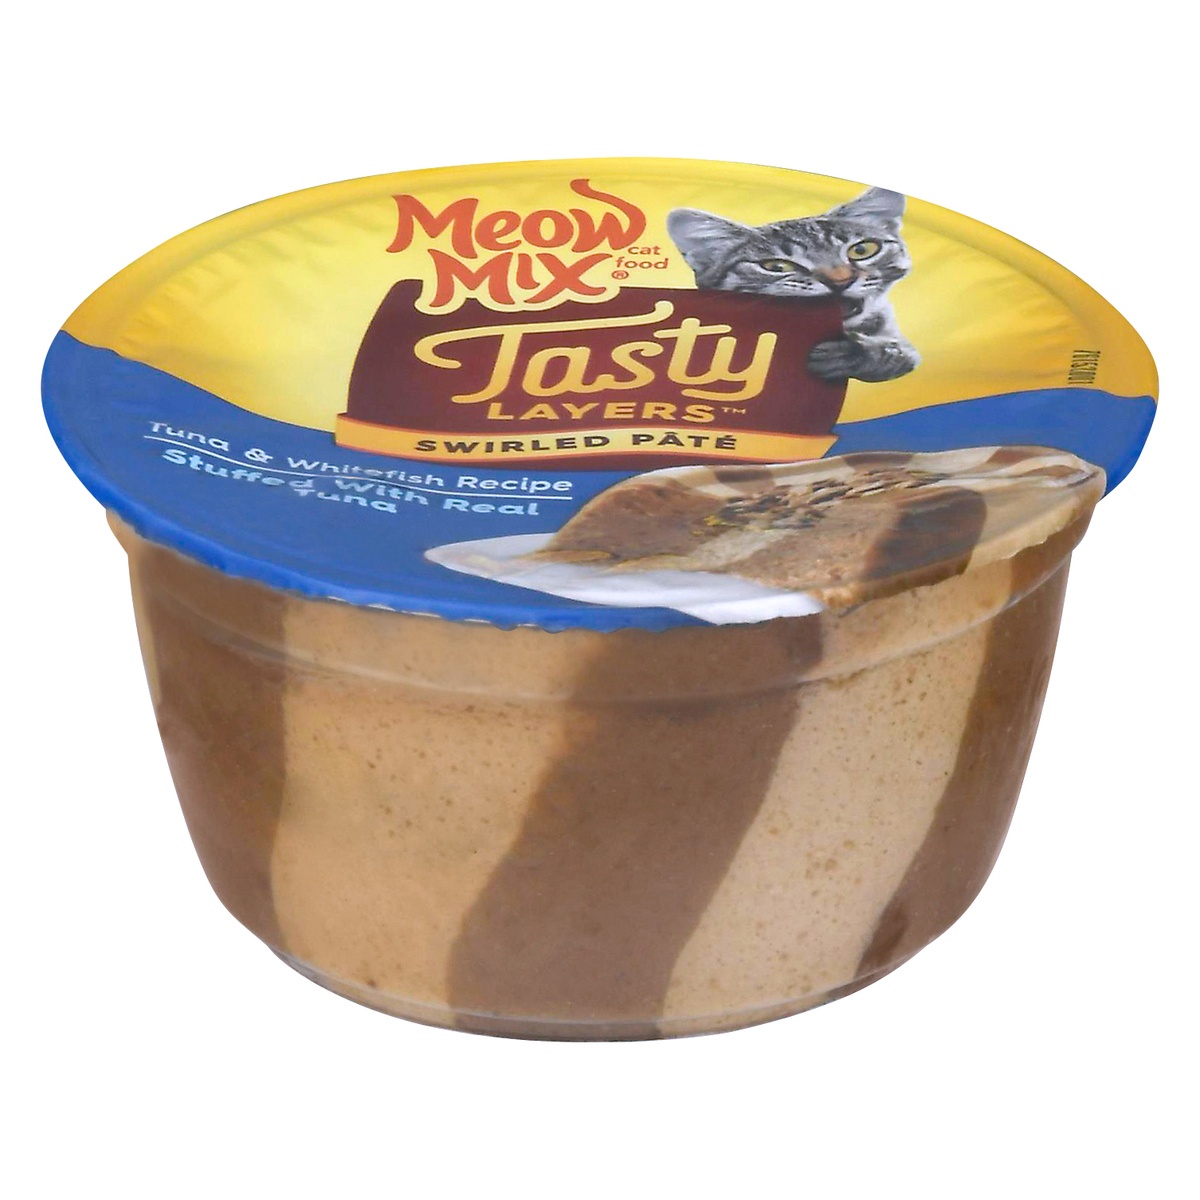 slide 10 of 10, Meow Mix Tasty Layers Swirled Paté Tuna and Whitefish Recipe Stuffed with Real Tuna Wet Cat Food, 2.75 oz